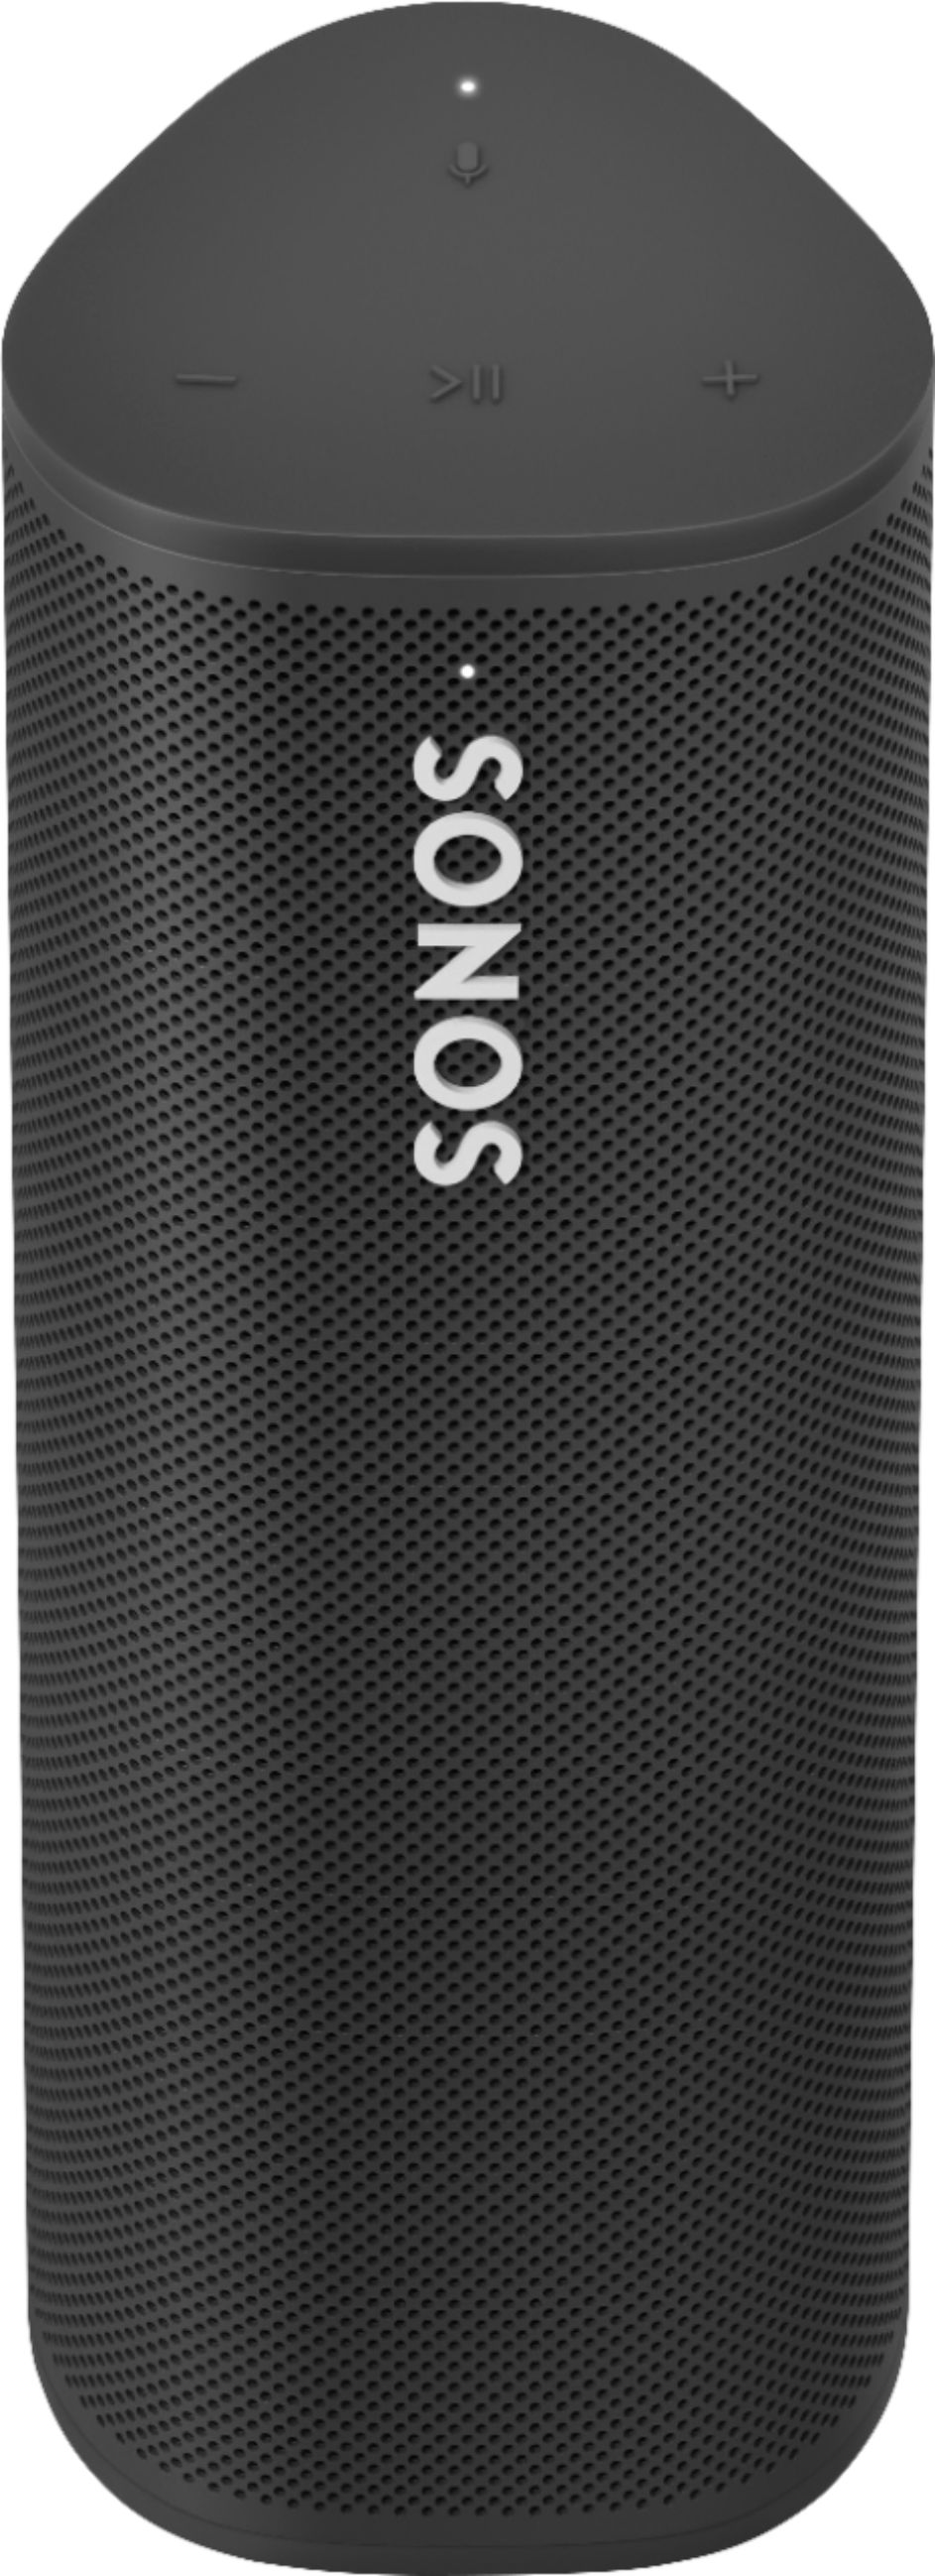 Sonos Smart Portable Wi-Fi and Bluetooth Speaker with Amazon and Google Assistant Black ROAM1US1BLK - Best